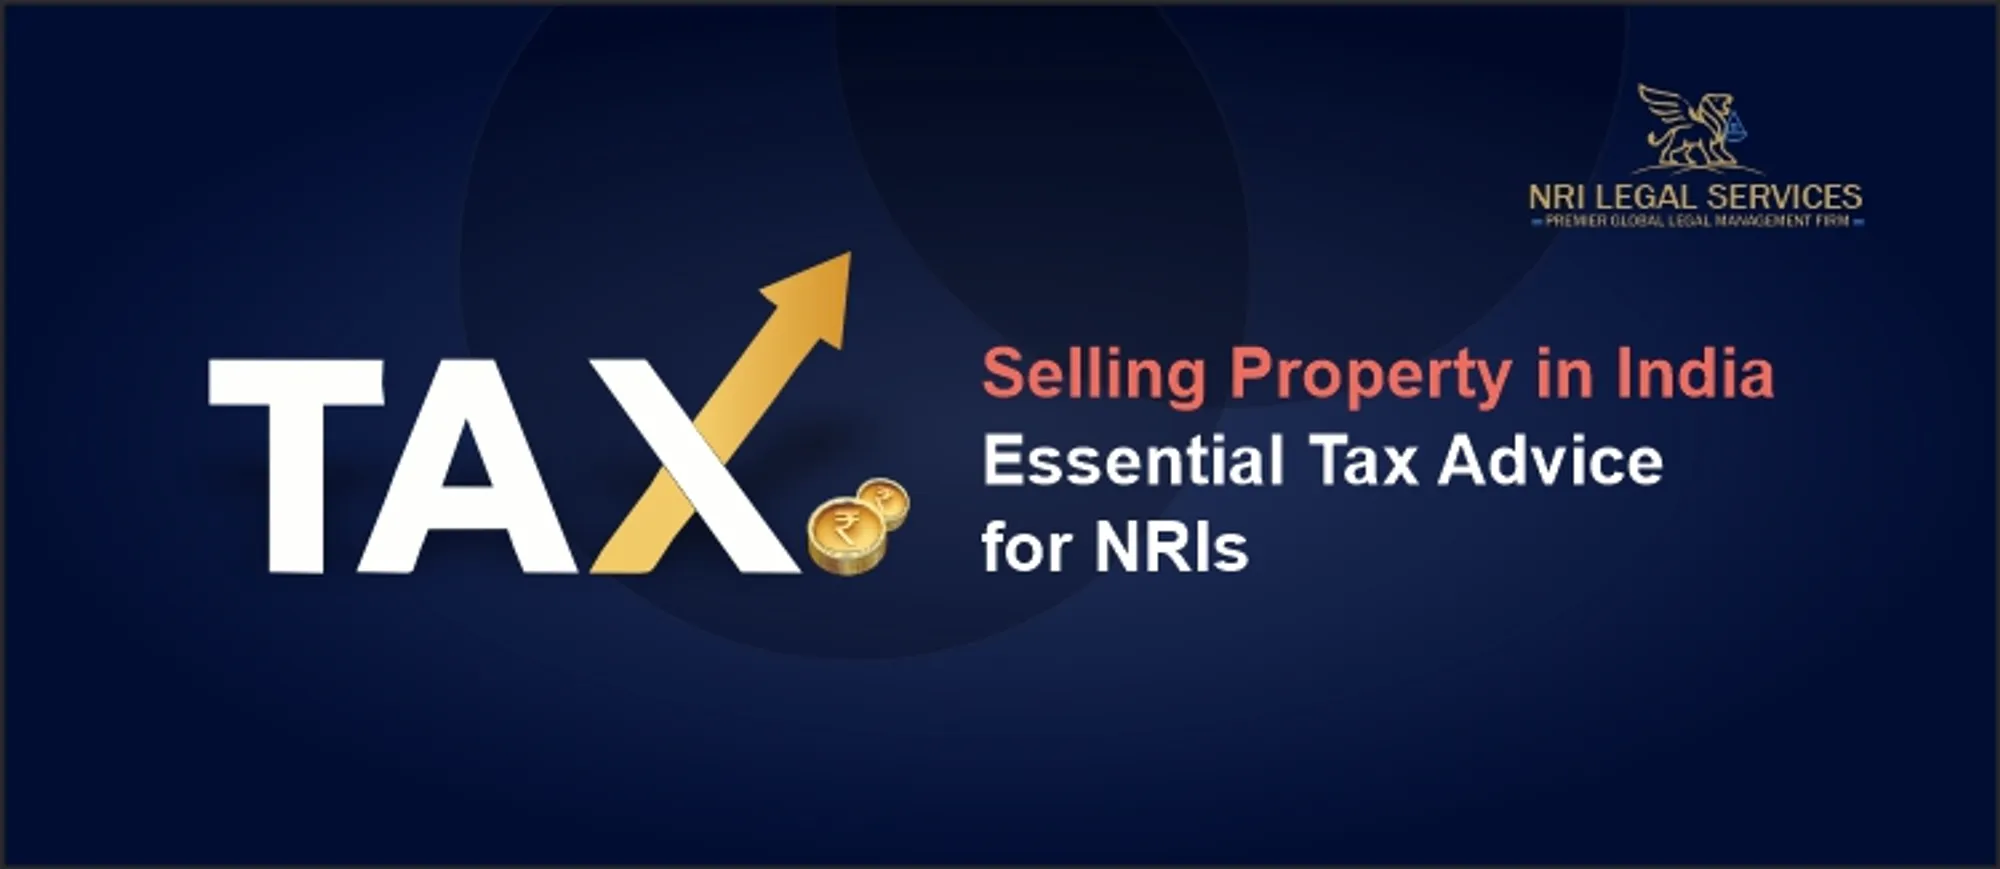 Selling Property in India - Essential Tax Advice for NRIs